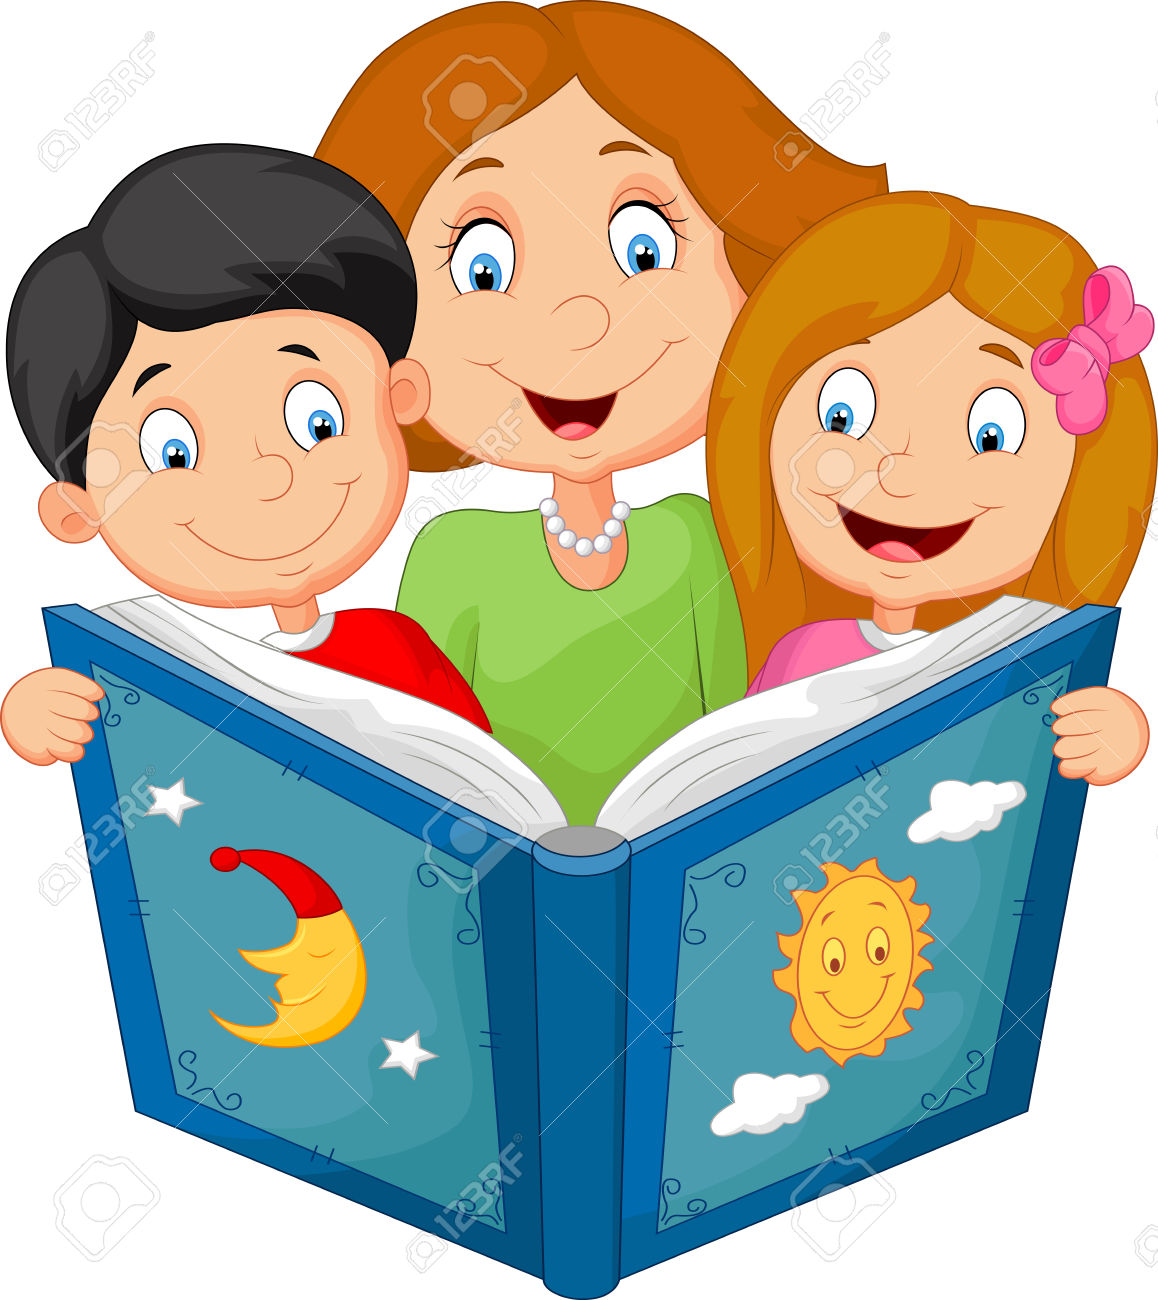 happiness clipart reading story